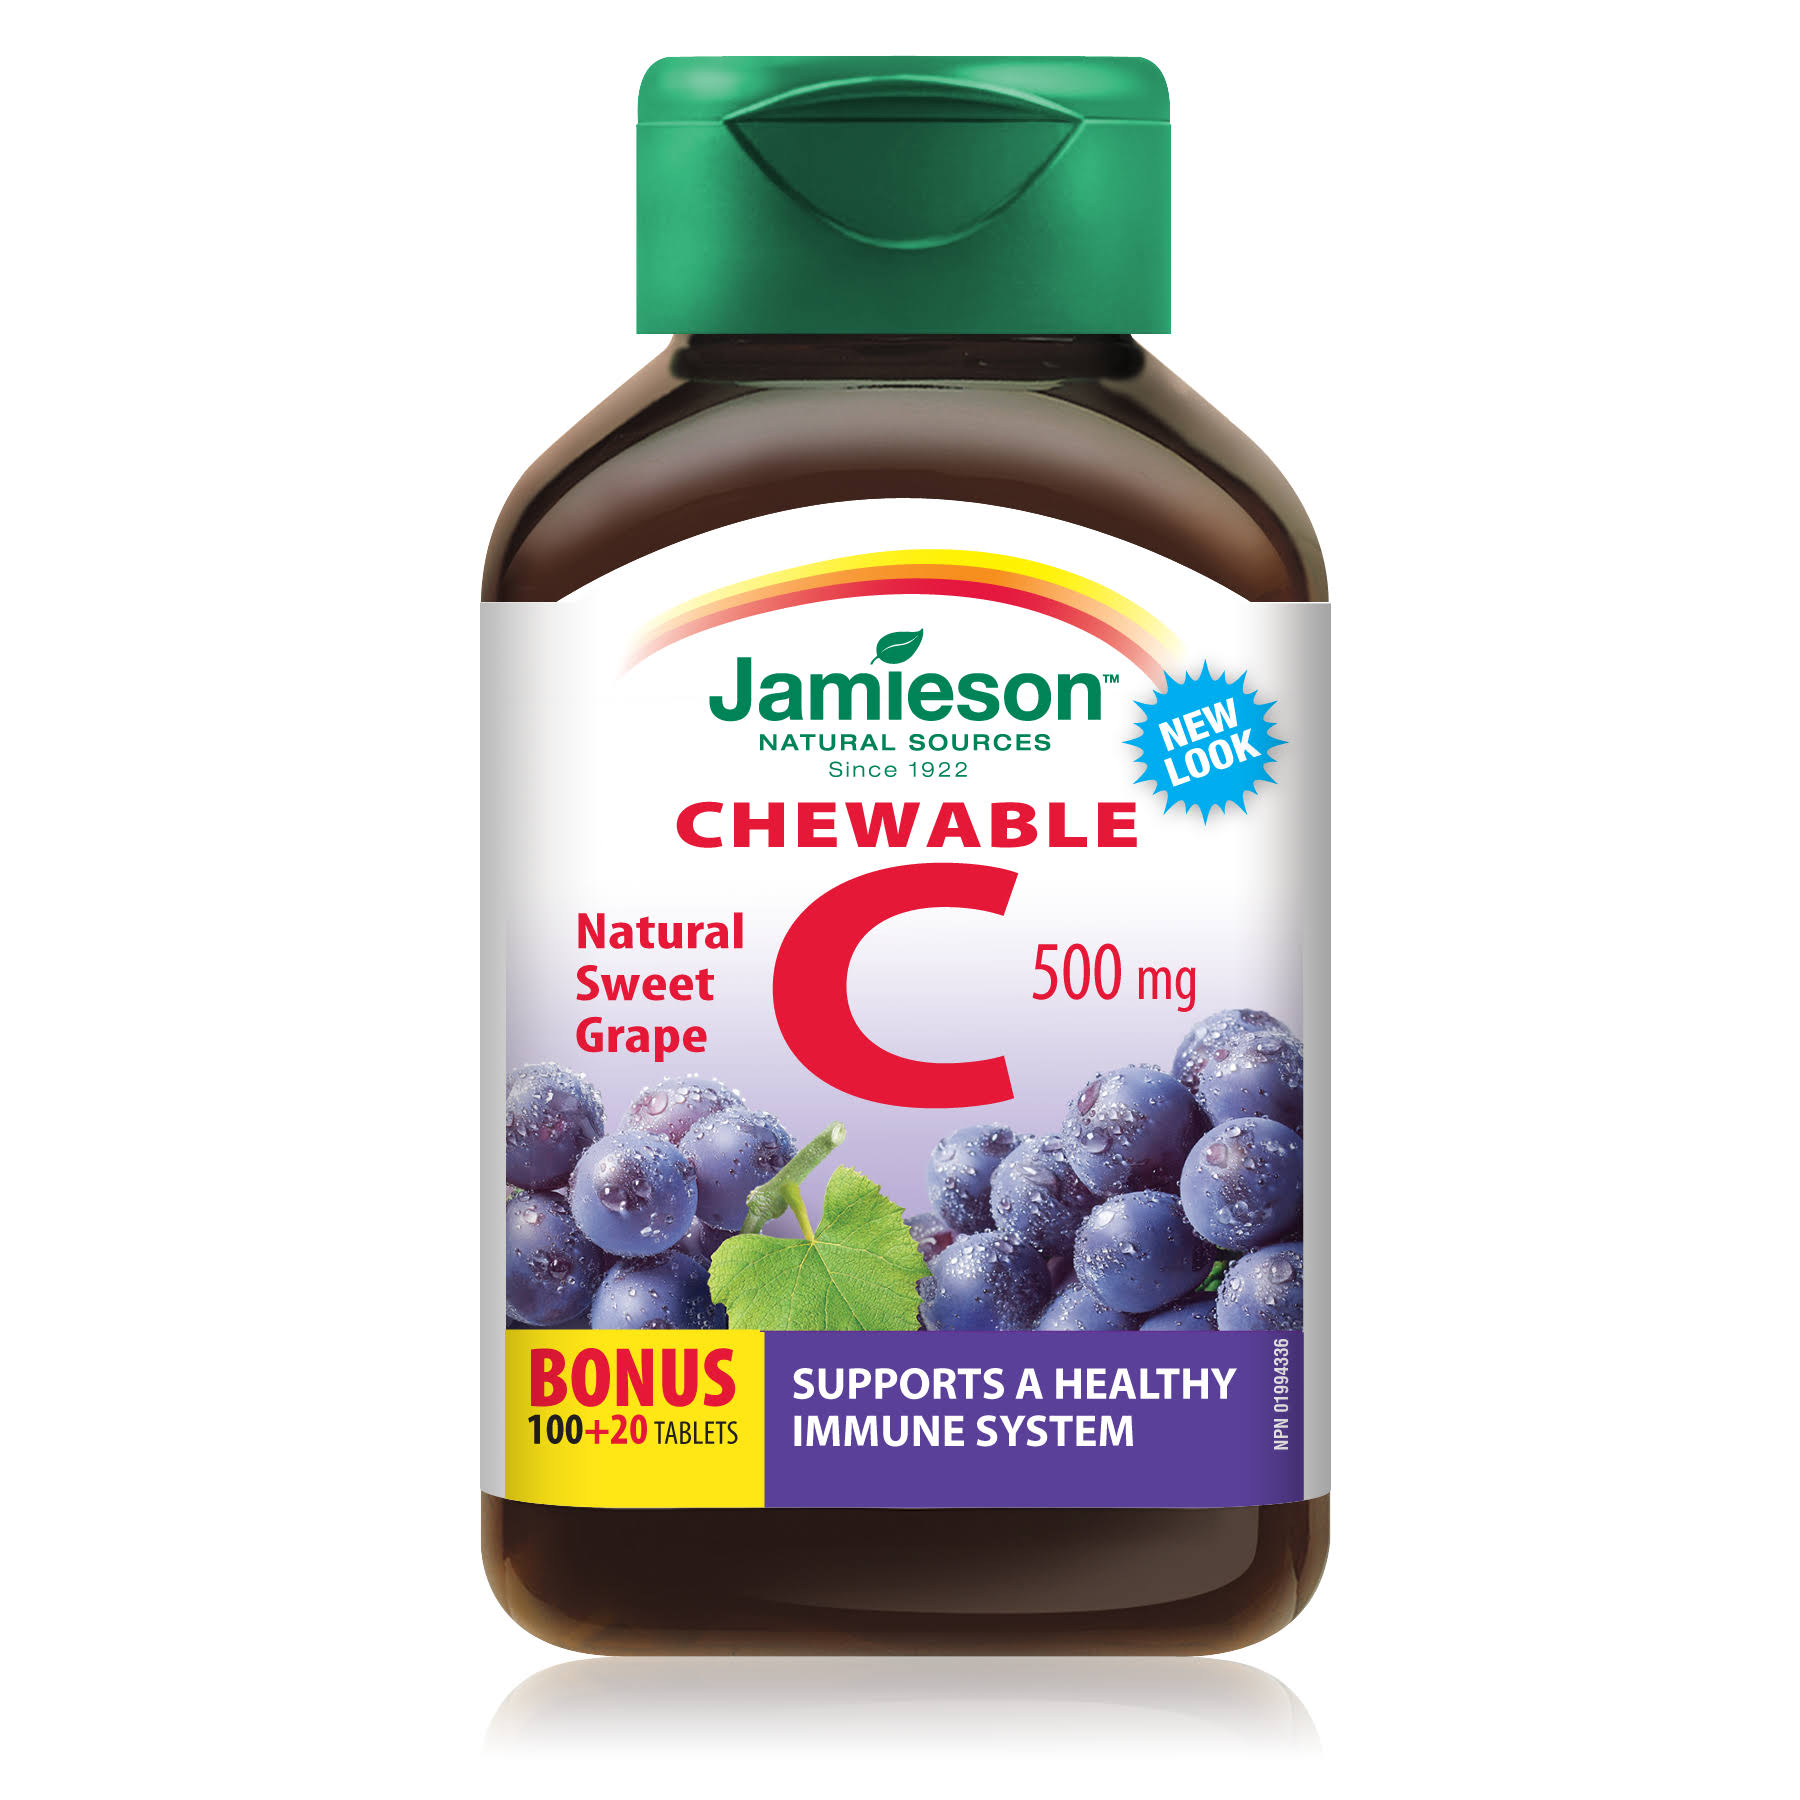 Jamieson Vitamin C Chewable Formula Supplement - 500mg, Grapes, 120 Tablets